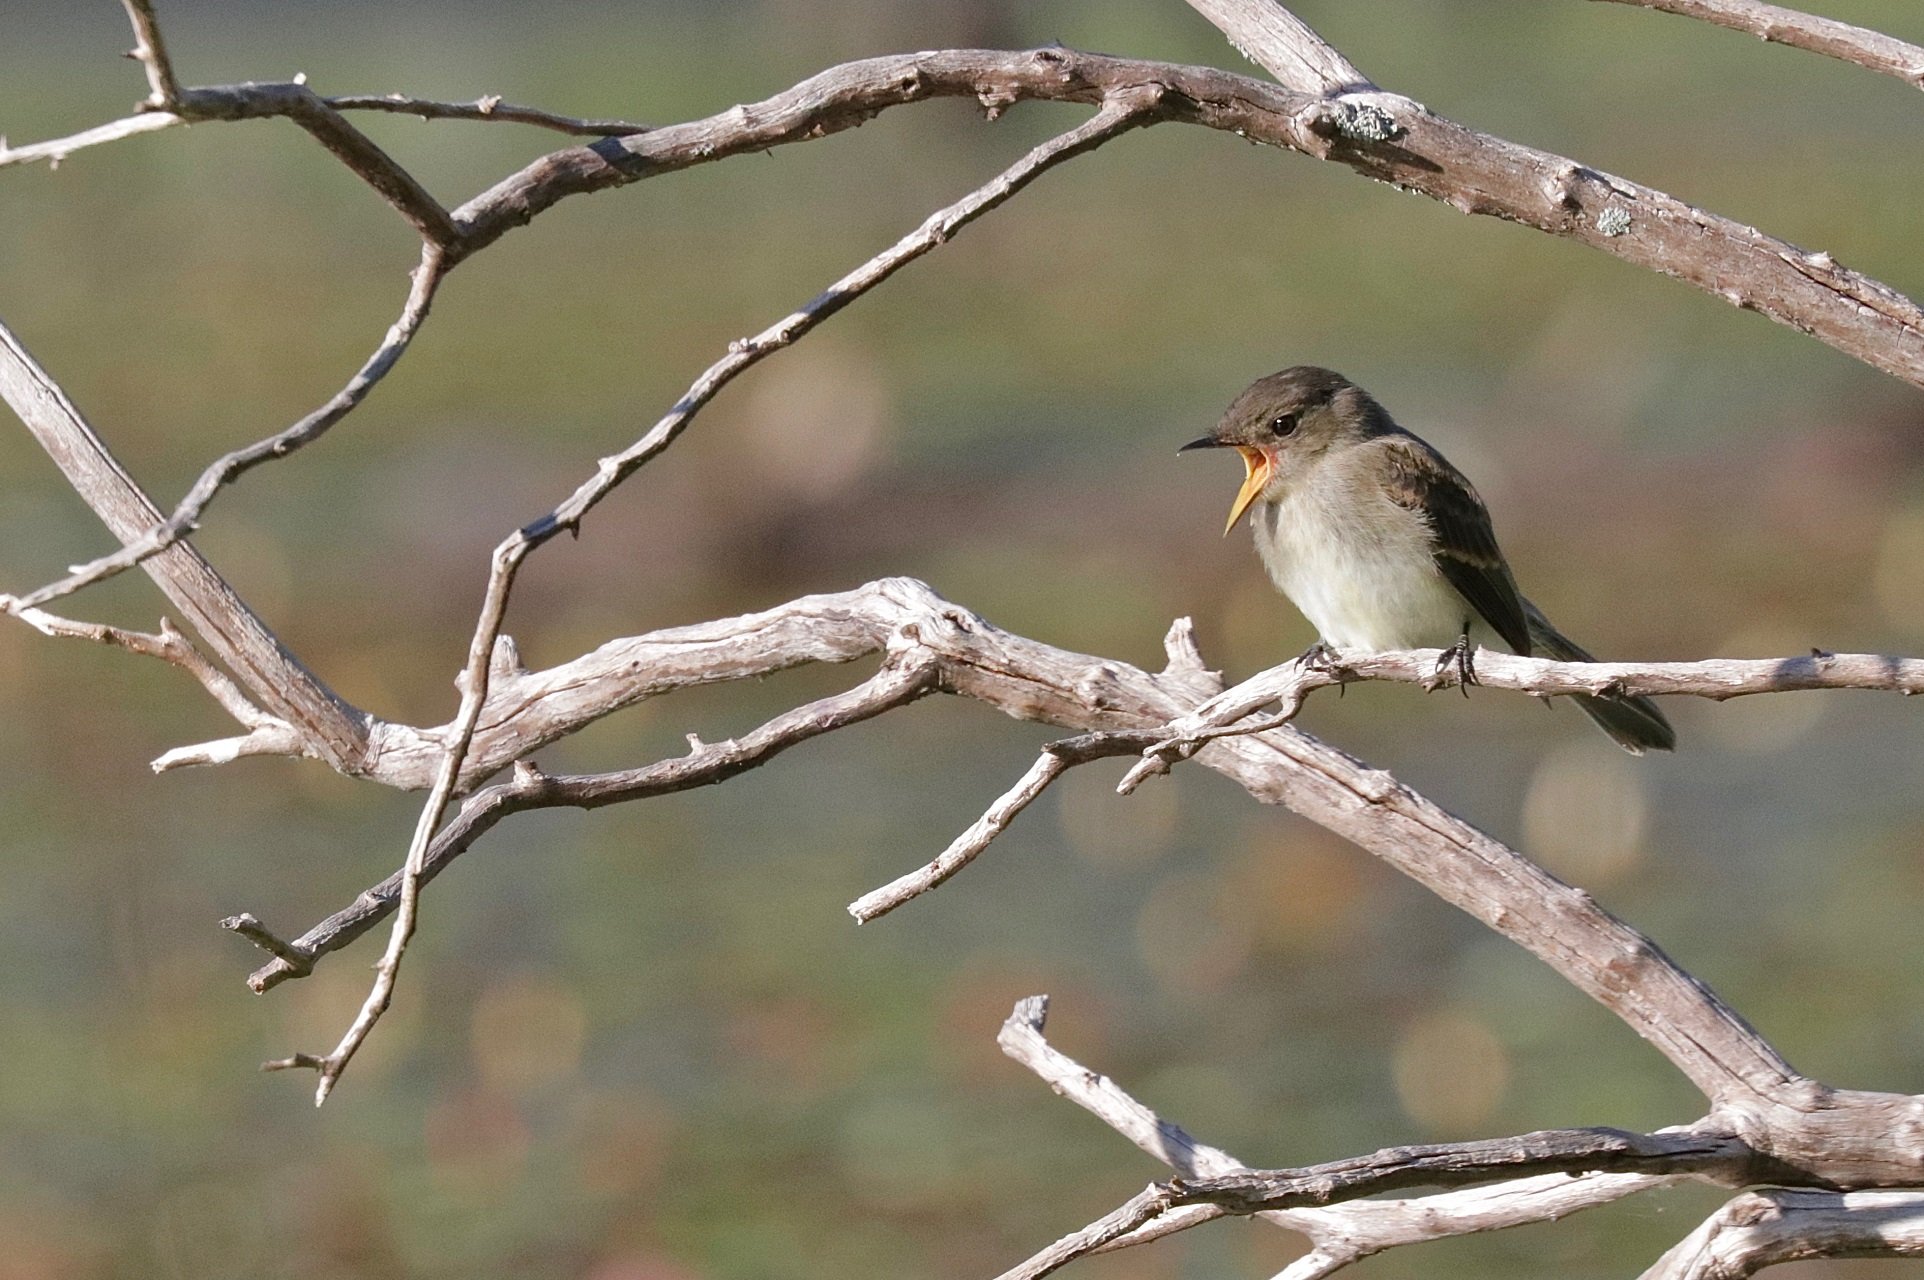 An Eastern Phoebe calls out from a bare branch.